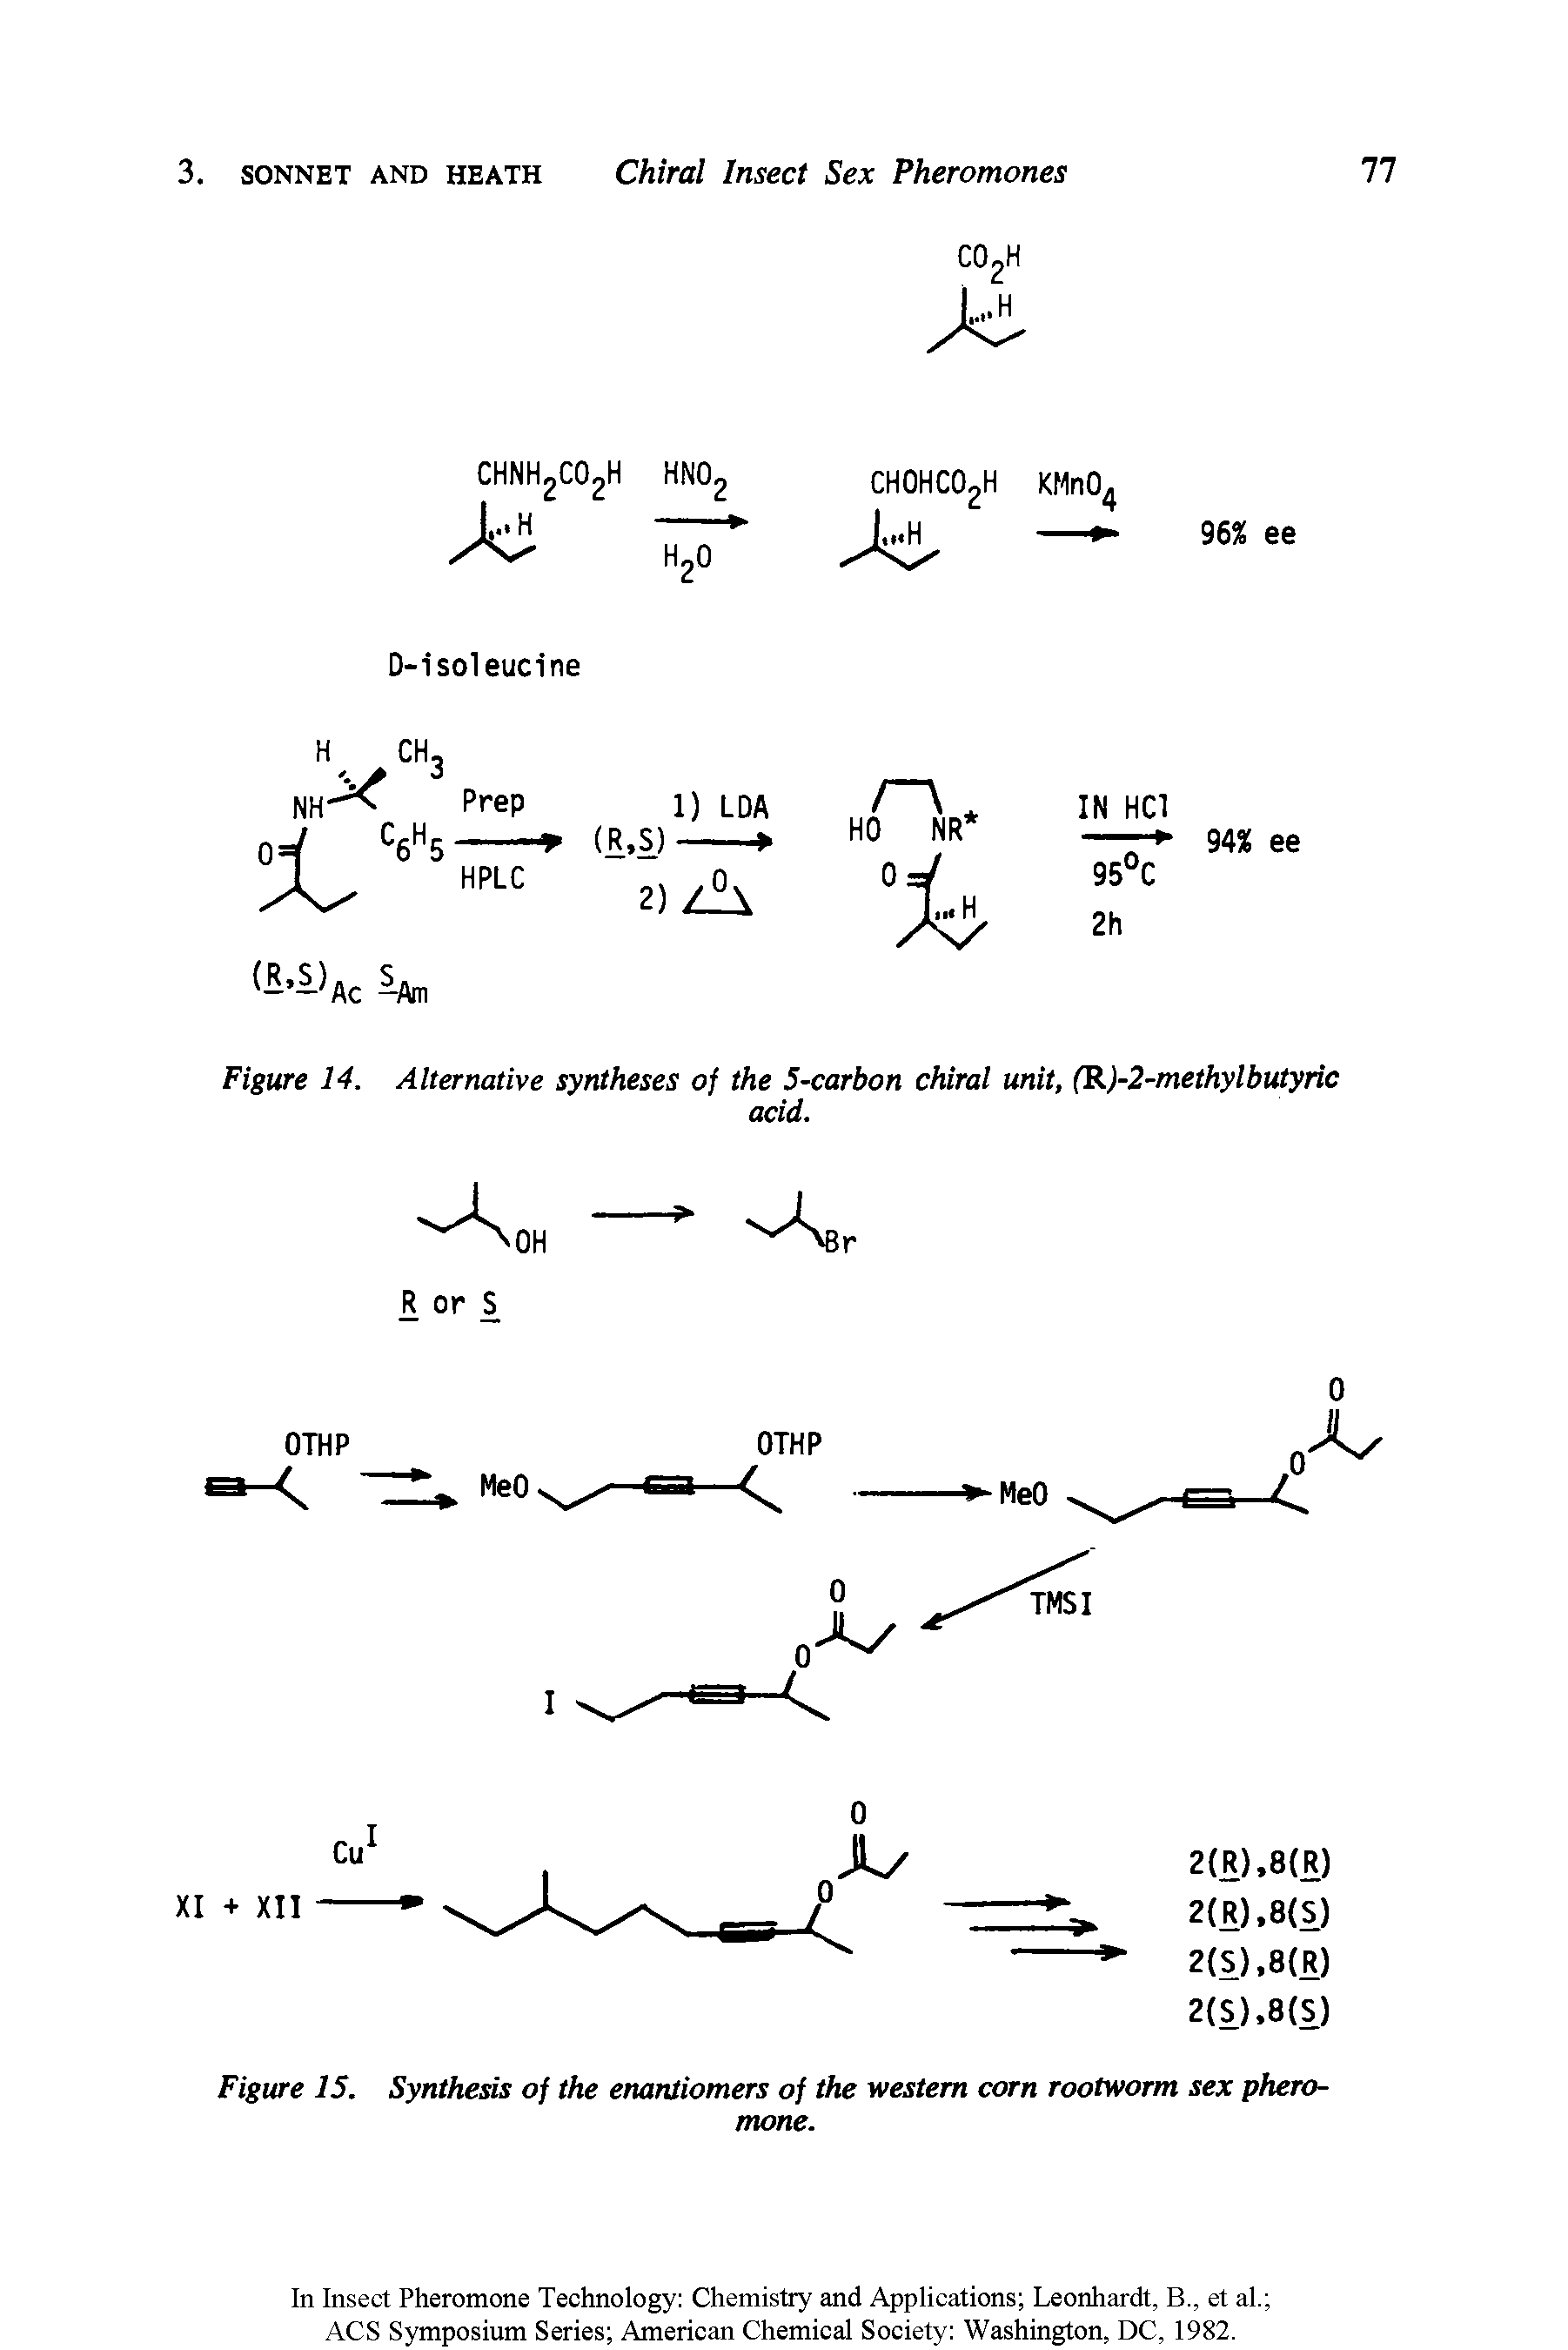 Figure 15. Synthesis of the enantiomers of the western corn rootworm sex pheromone.